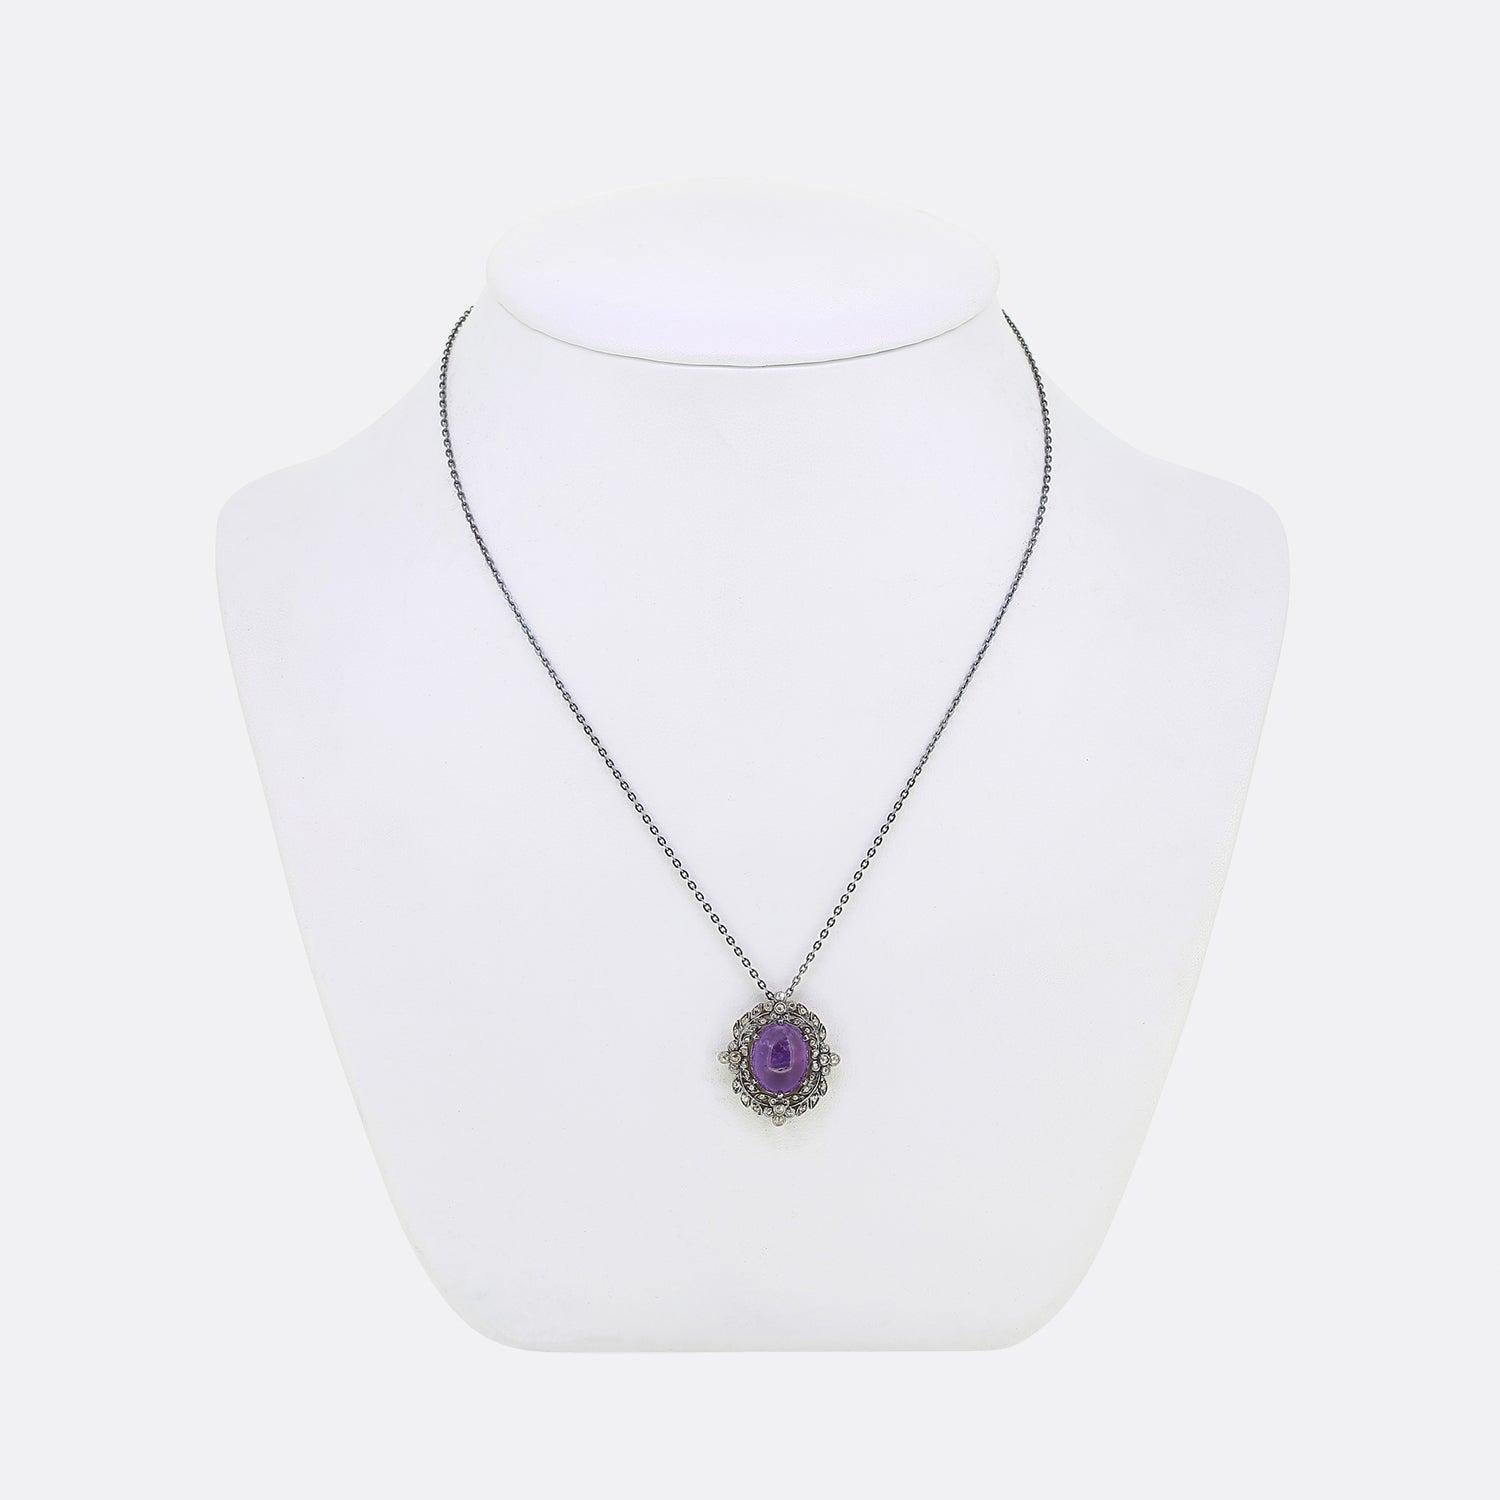 Here we have a charming amethyst and diamond necklace.

A sizeable oval shaped cabochon amethyst sits at the centre of an ornate mount and is accompanied by a vast array of rose cut diamonds. This foliated design is set upon a yellow gold backing